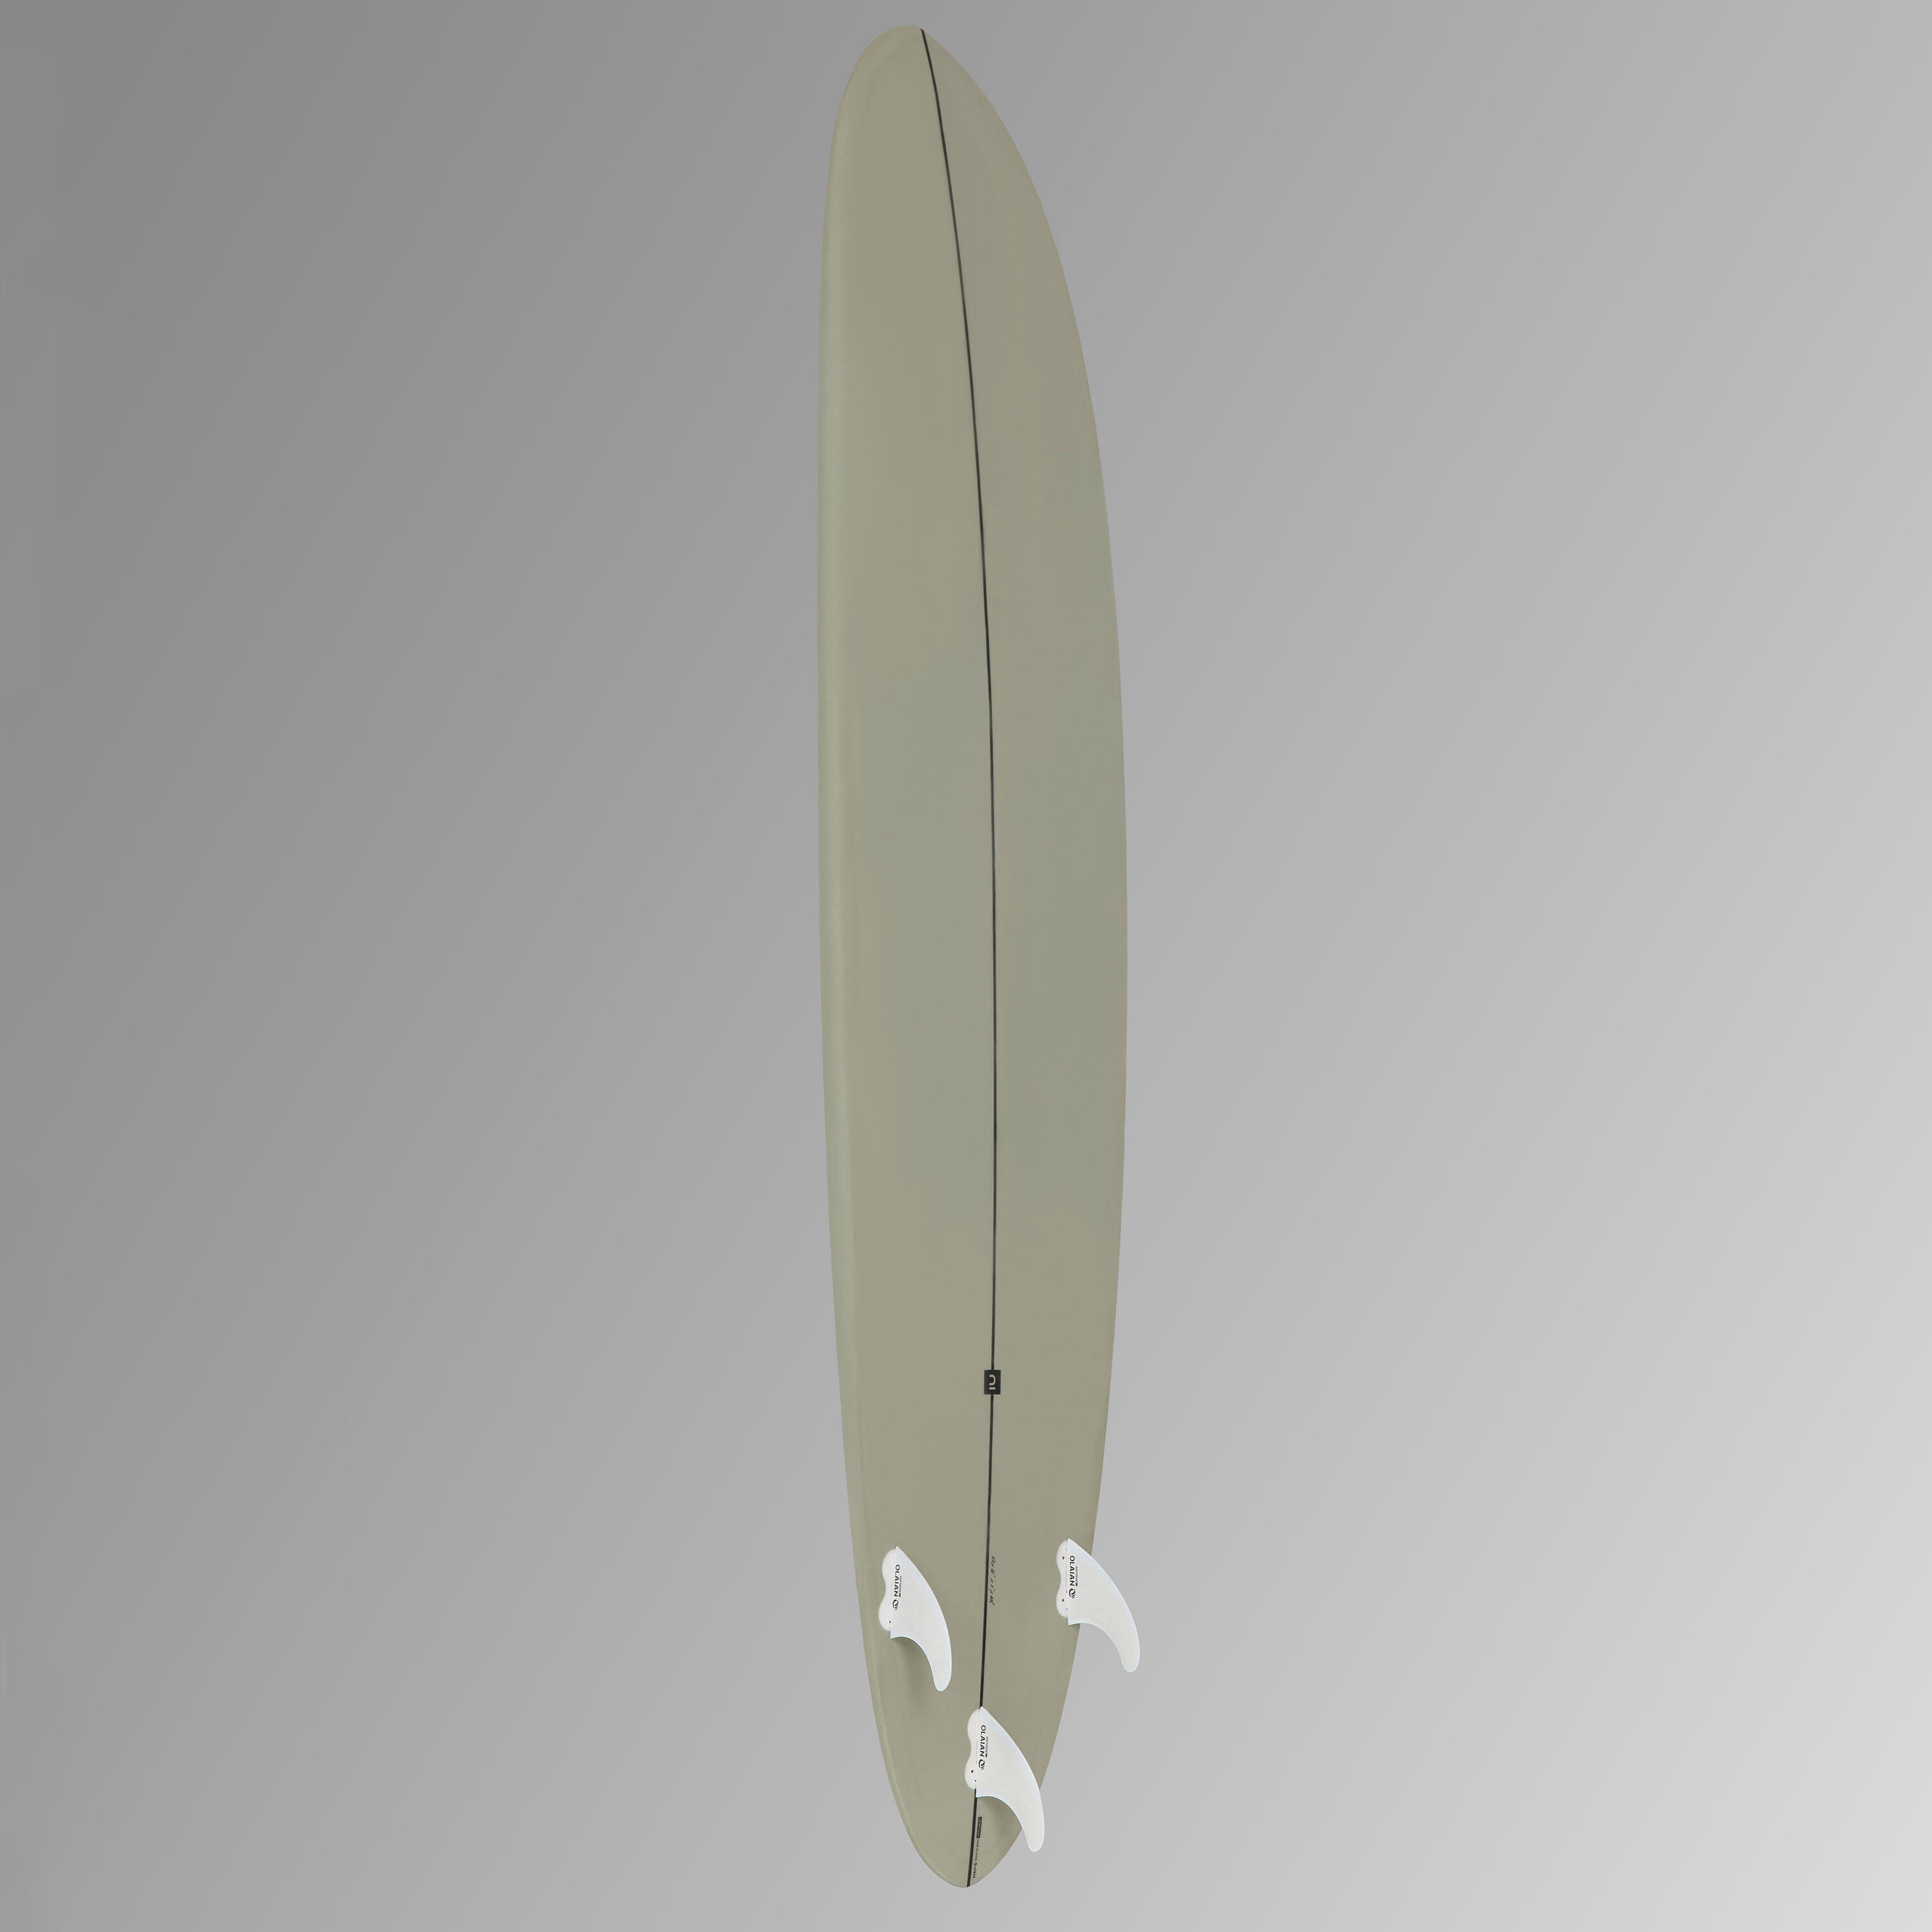 SURFBOARD 500 Hybrid 8' with 3 Fins. 9/15